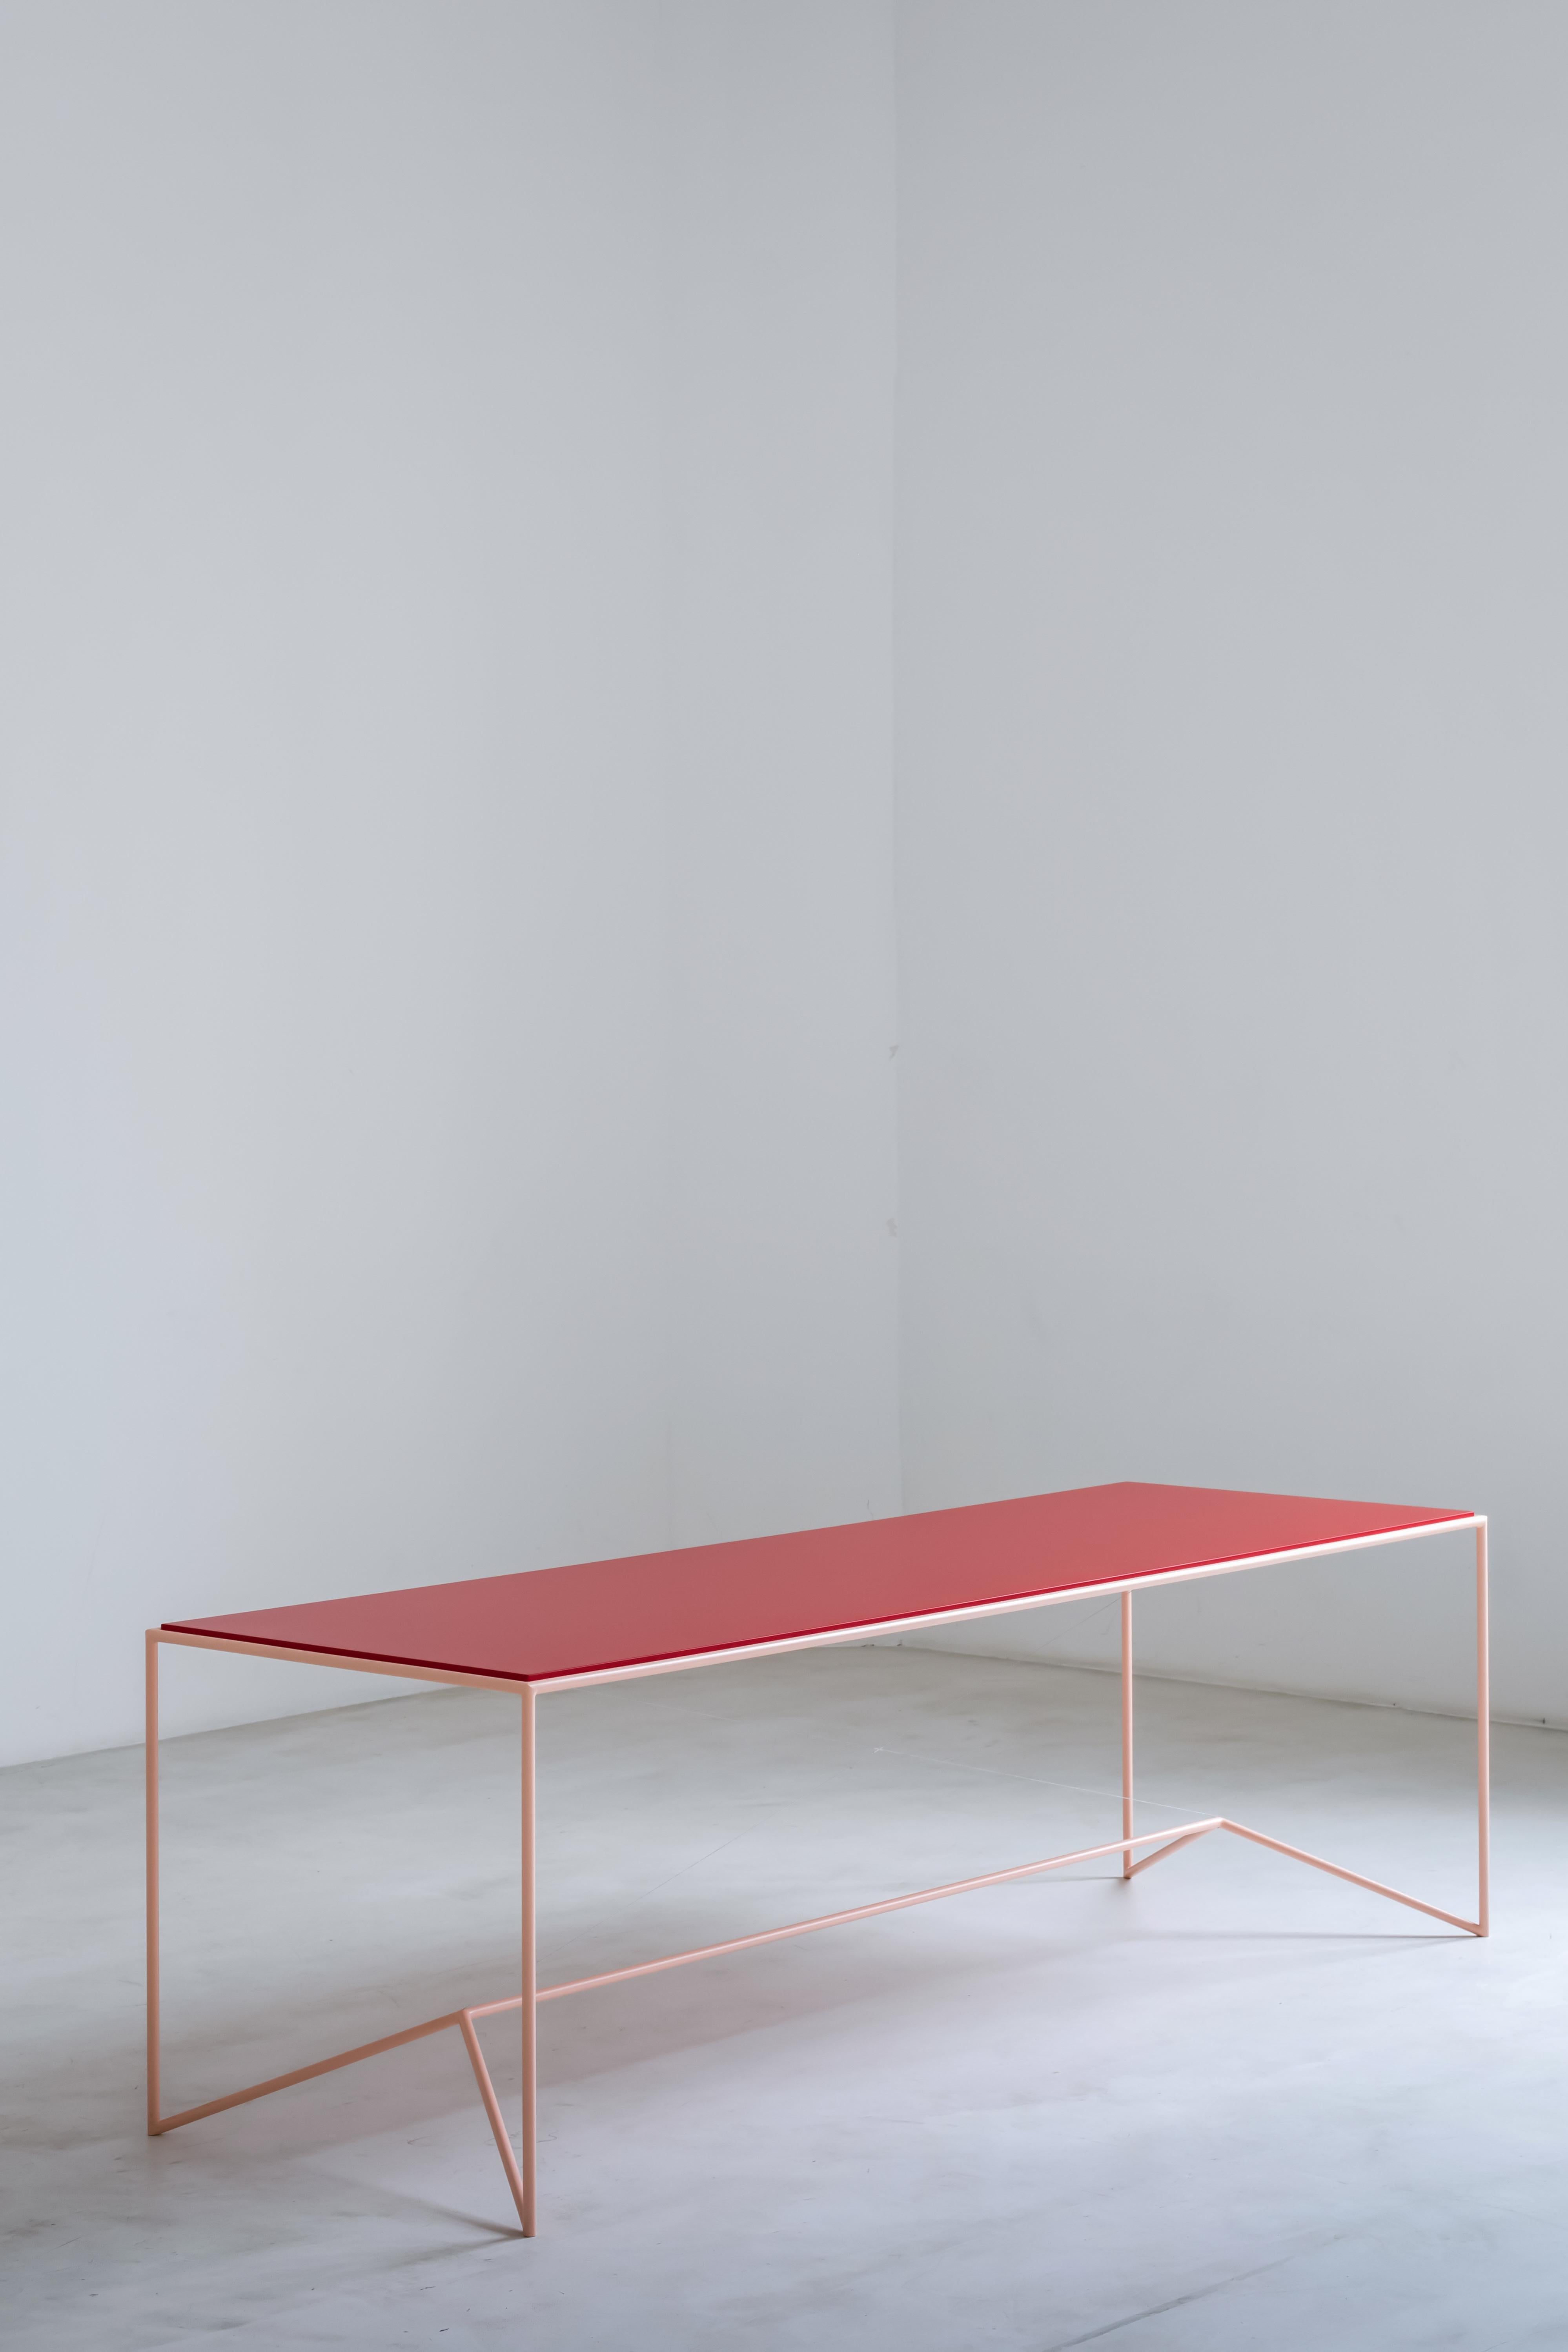 Belgian Piece Large Pink and Red Table by Maria Scarpulla